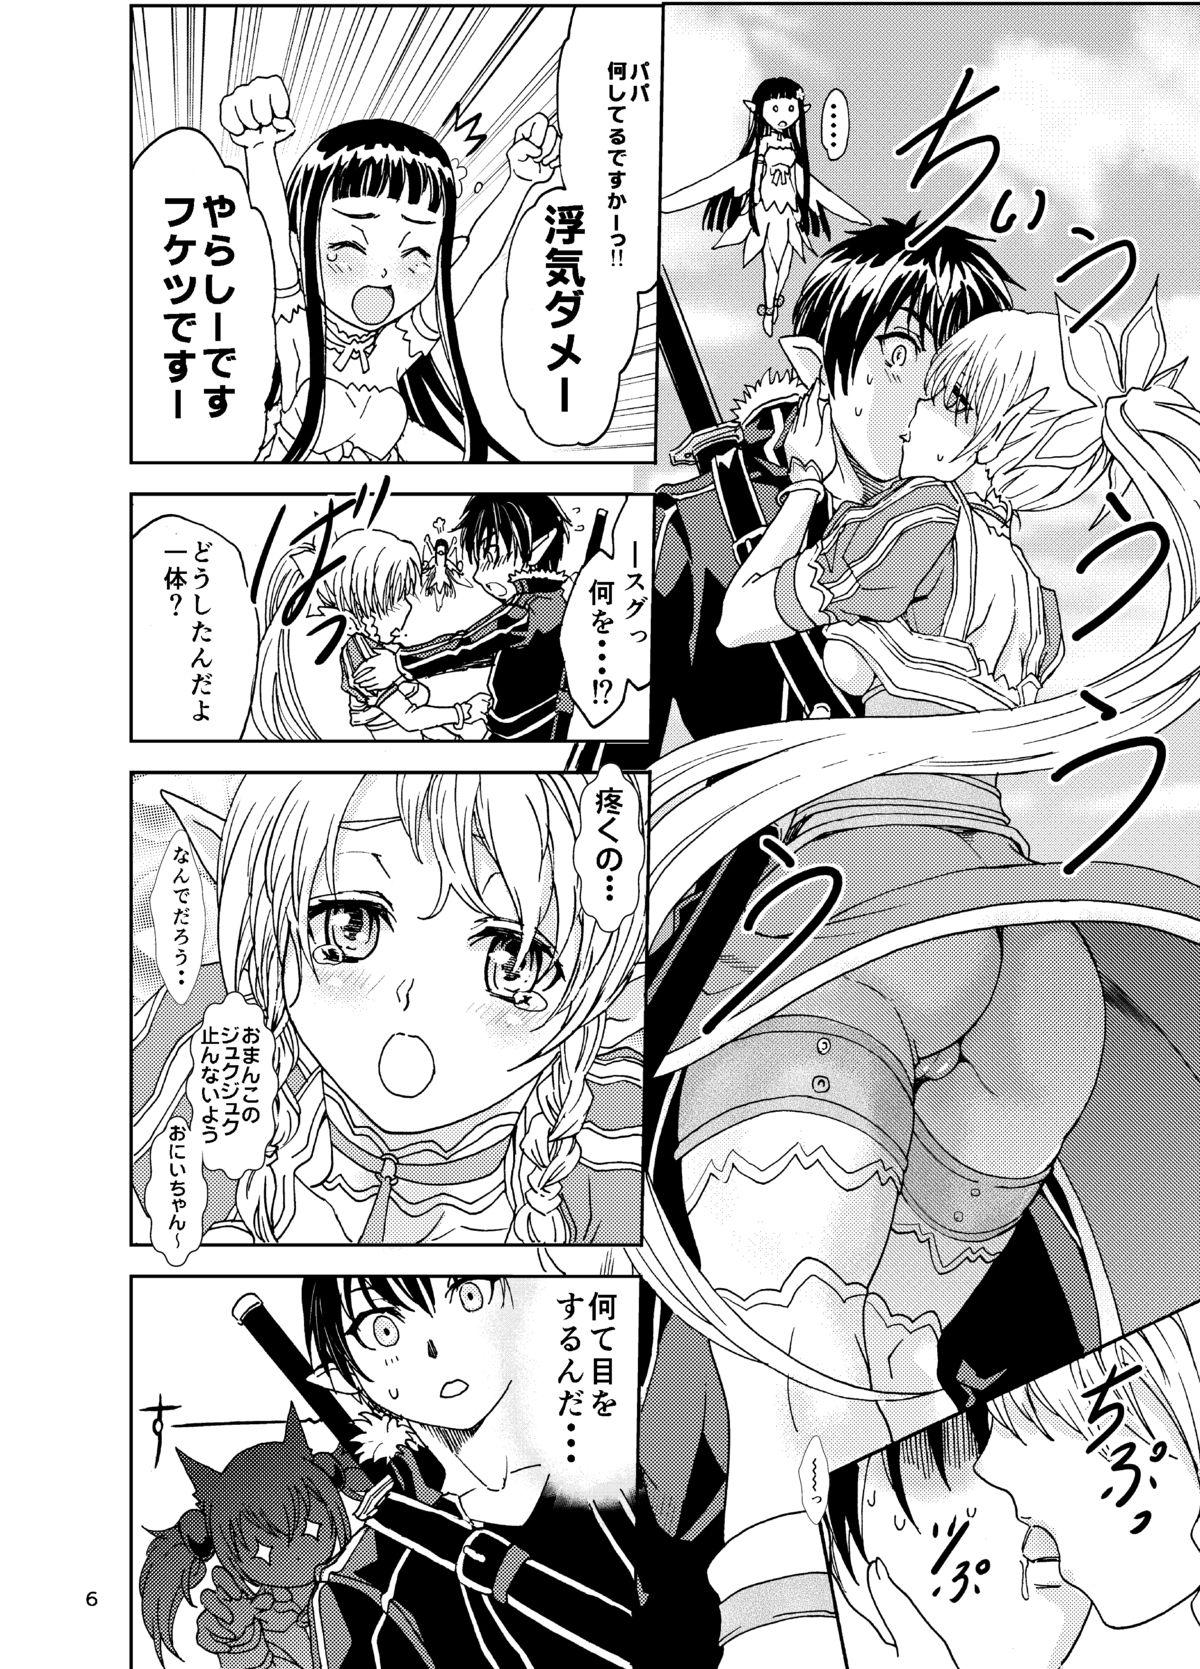 Old Vs Young Kanninn Overflow - Sword art online Student - Page 6